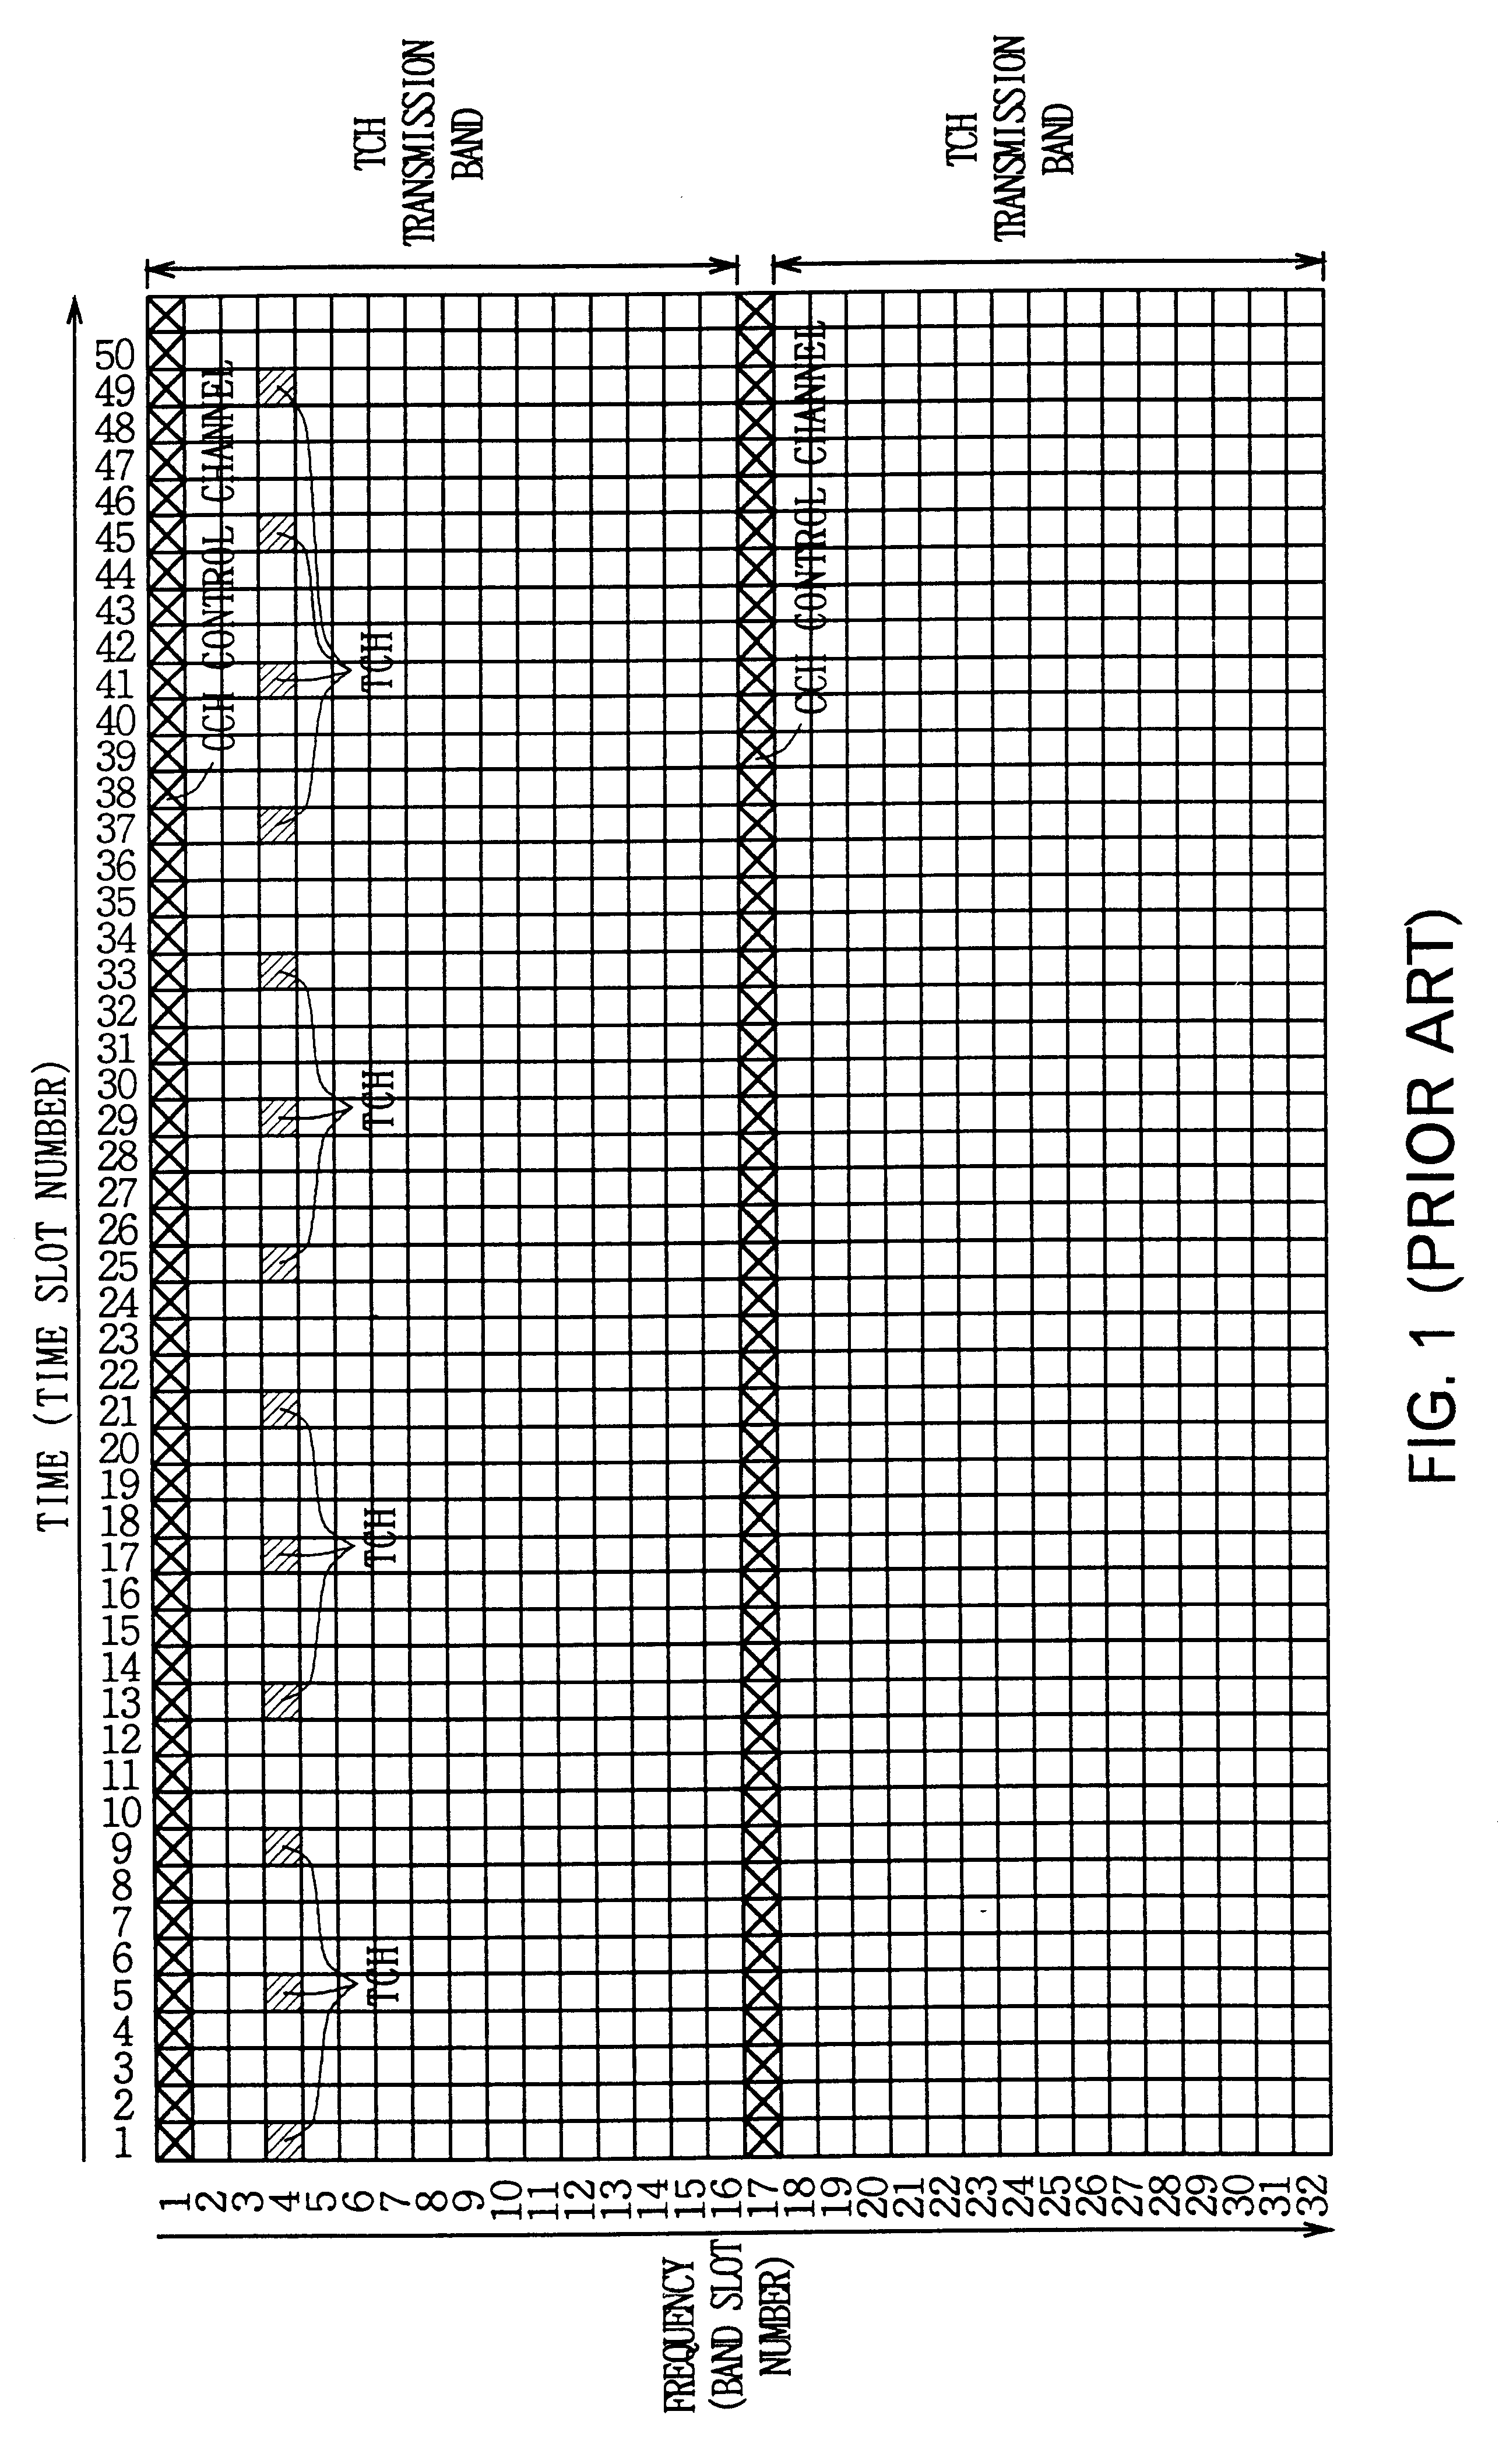 Communication method and apparatus in which first and second control channels operate as an initial acquisition channel and a broadcast channel, respectively